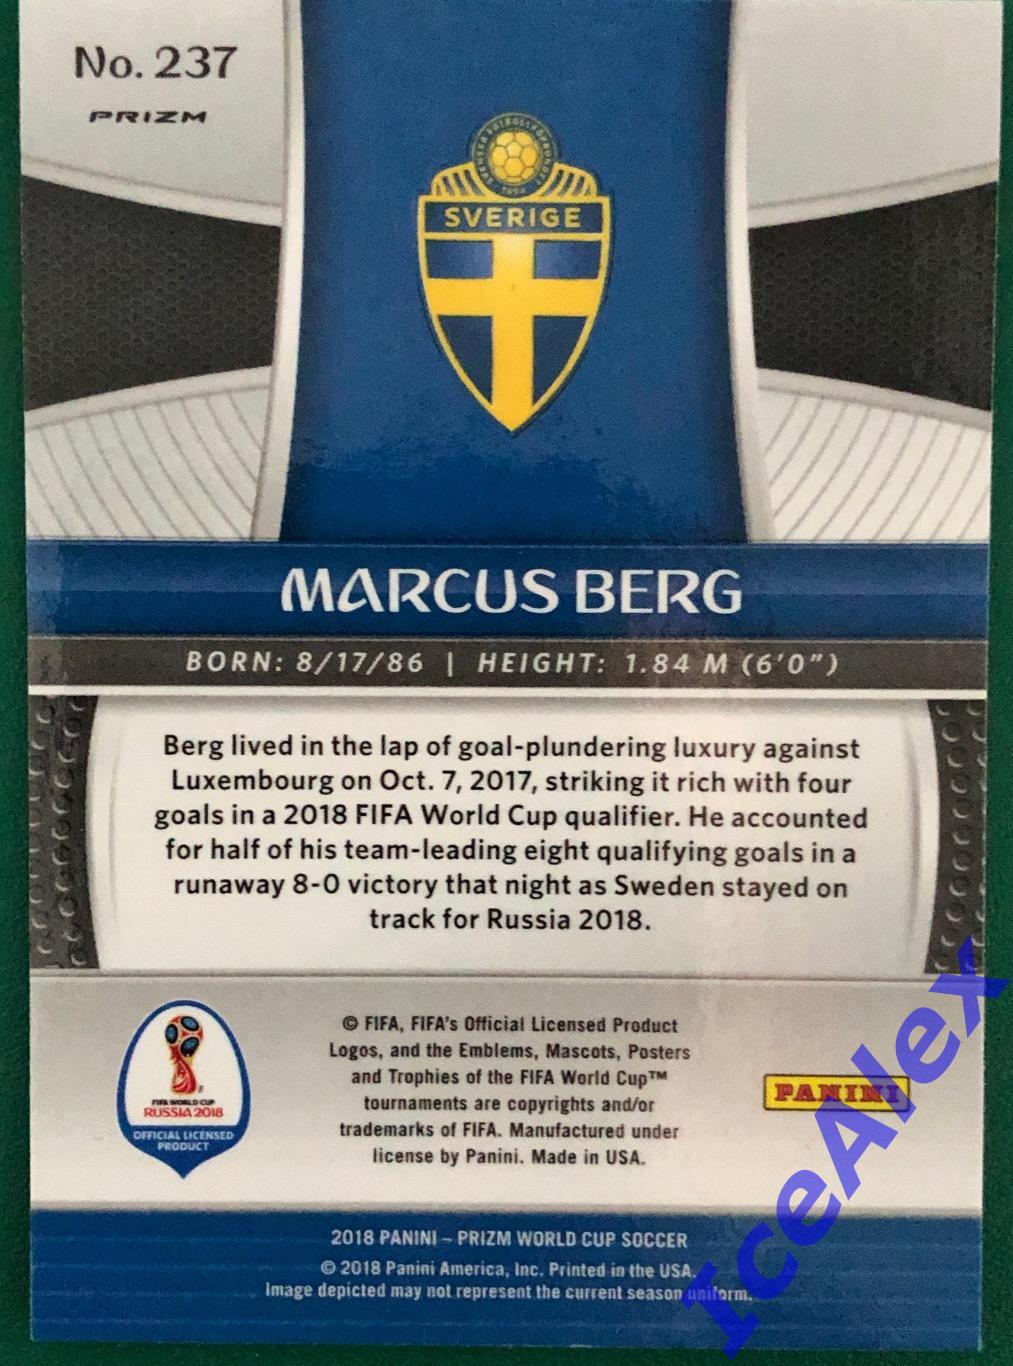 2018 Panini Prizm World Cup, #237RBW, Marcus Berg, Sweden 1